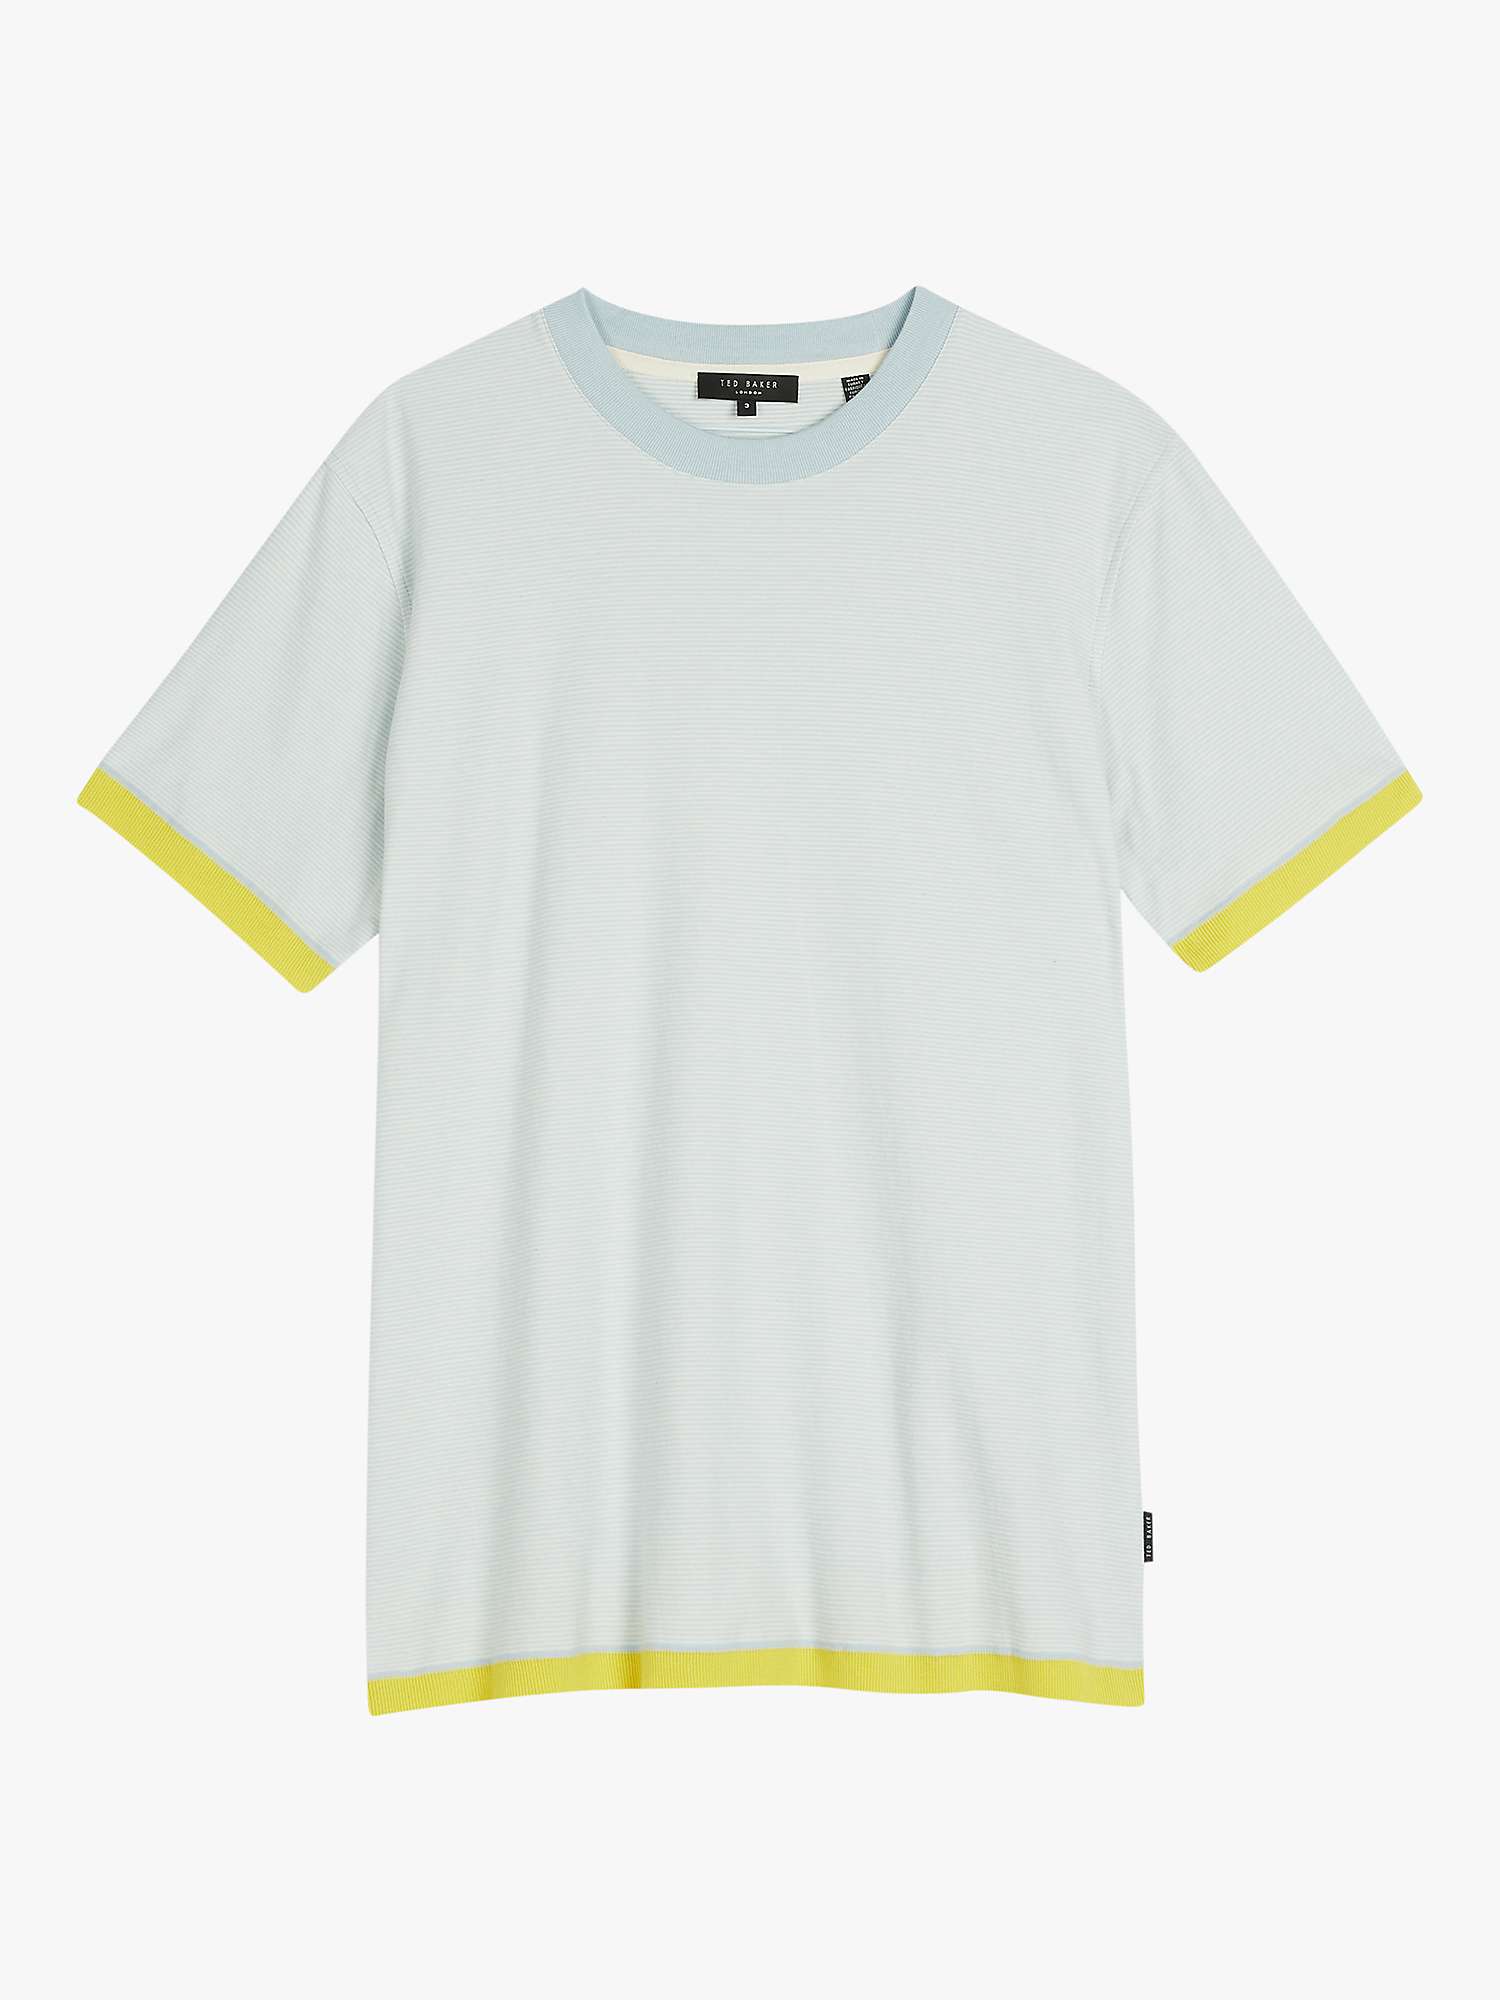 Buy Ted Baker Camoff Striped T-Shirt Online at johnlewis.com